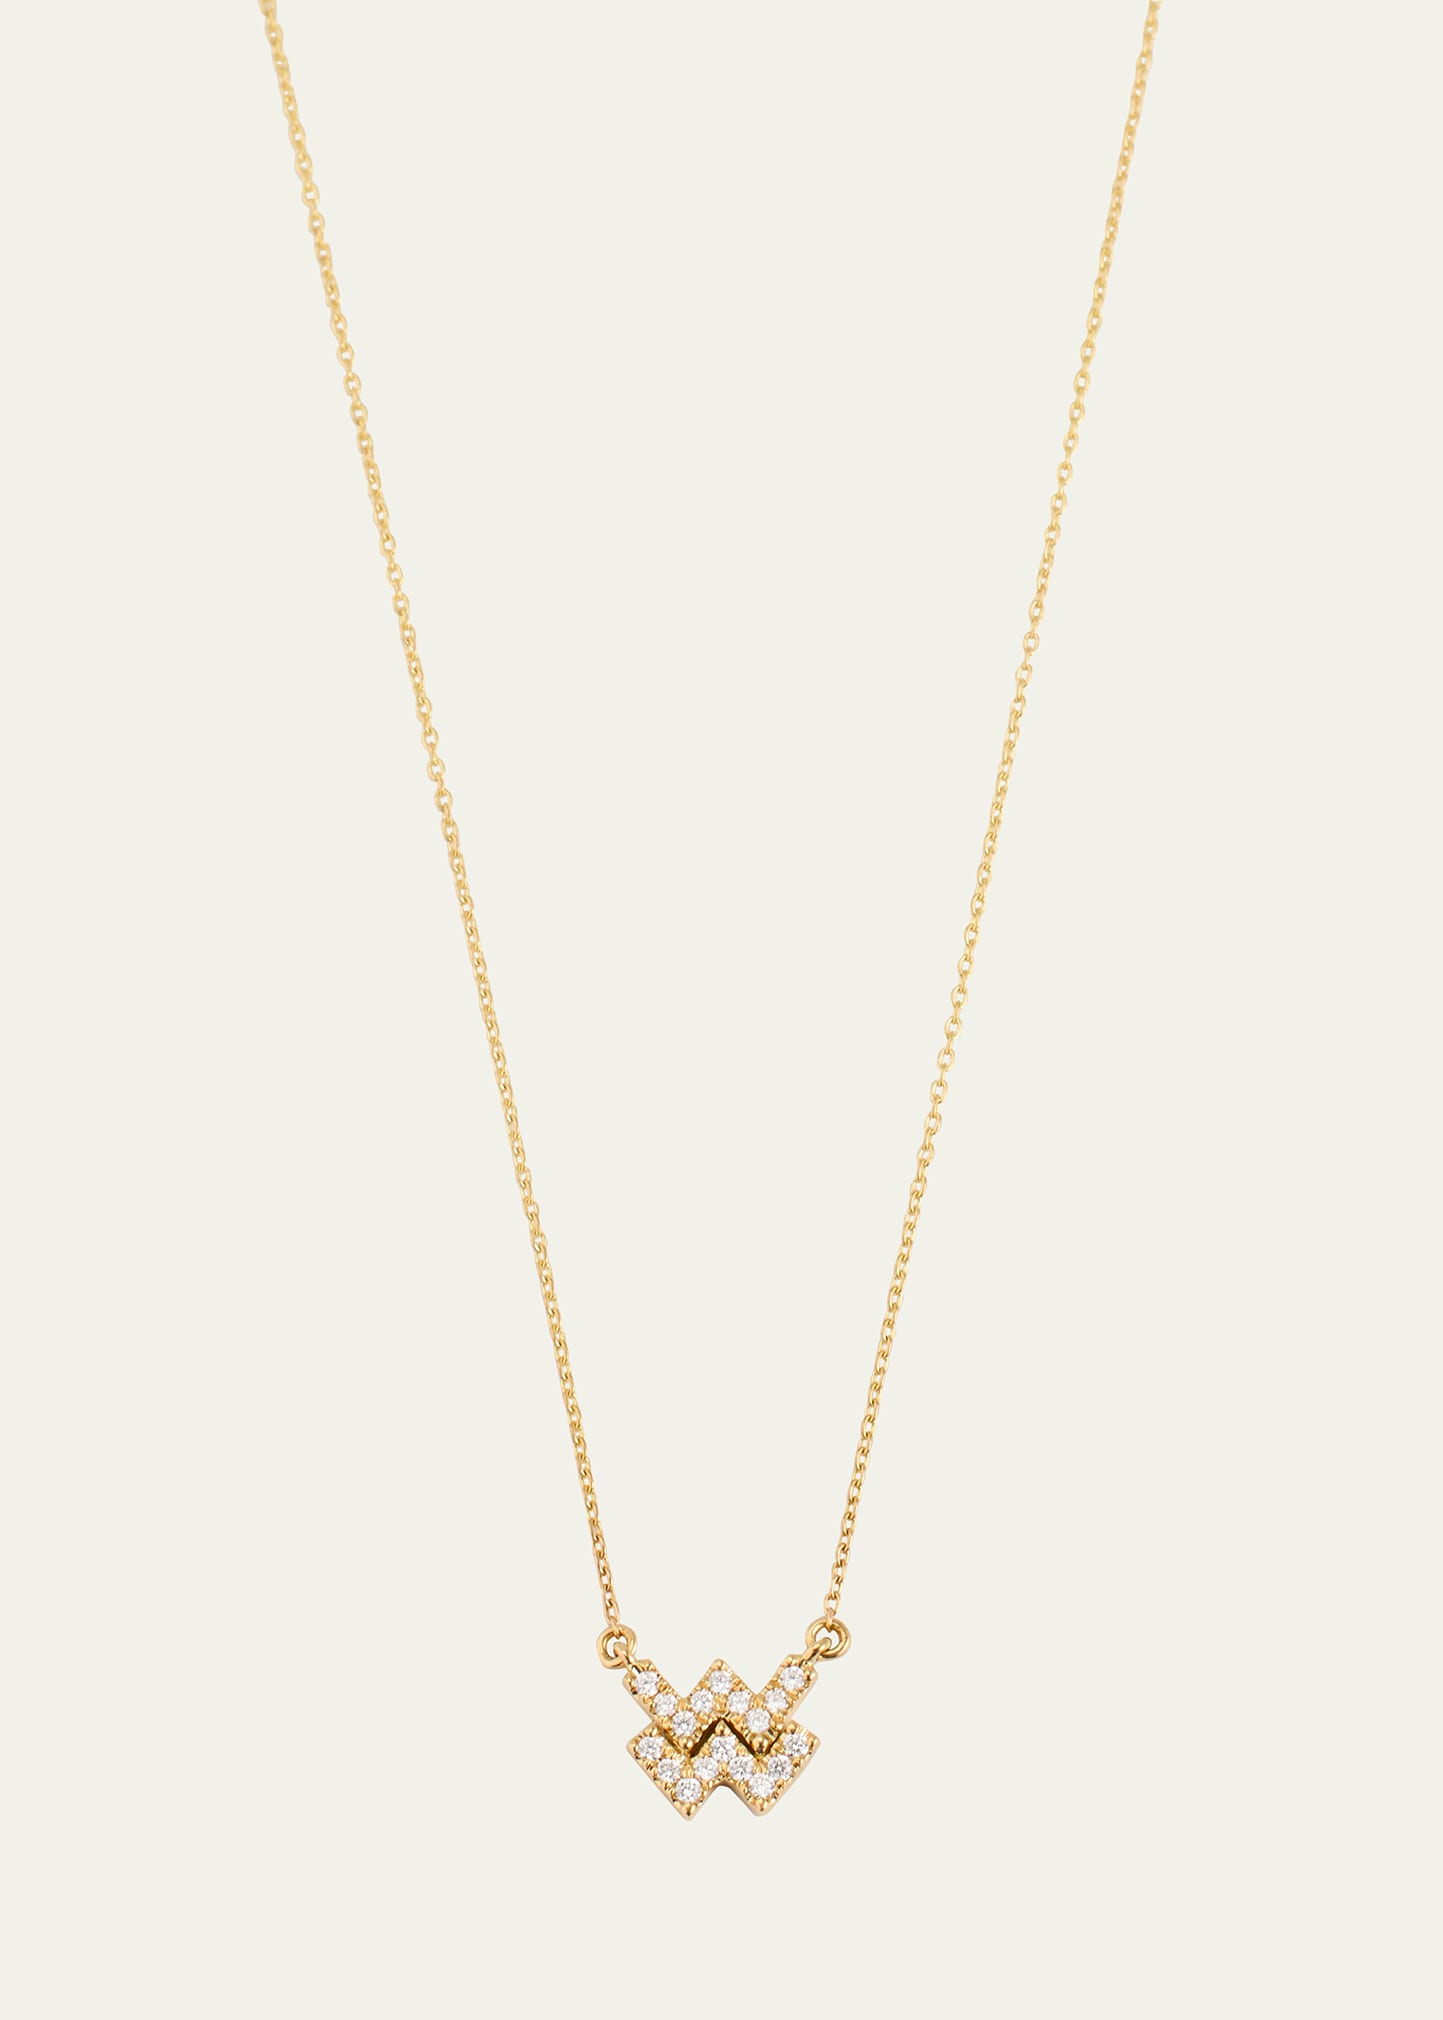 Star Sign Necklace, Aquarius, in Yellow Gold and White Diamonds